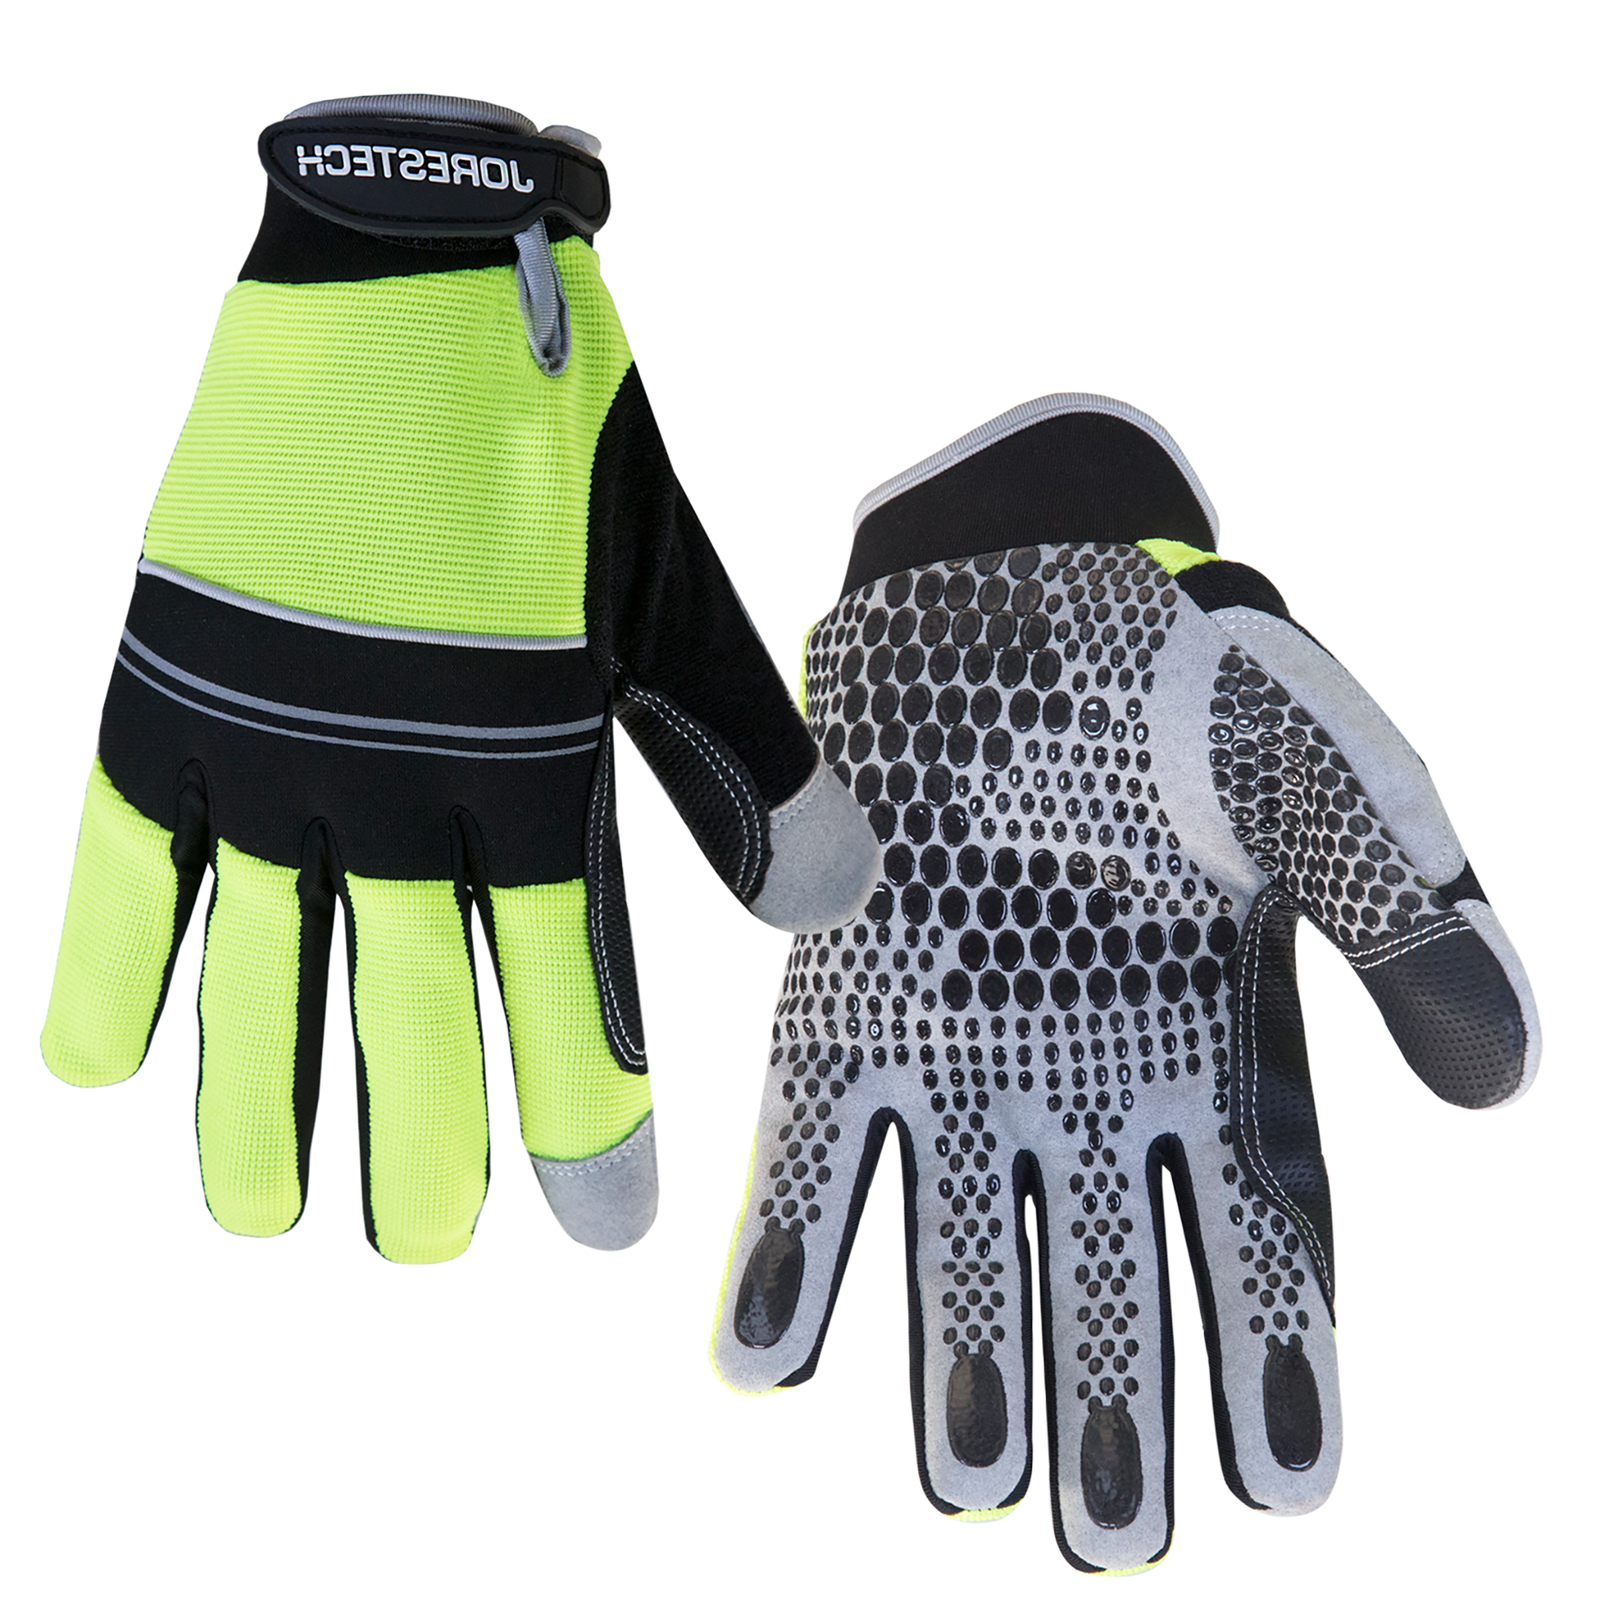 1 pair of lime JORESTECH safety work gloves with anti slip silicone black dotted palms